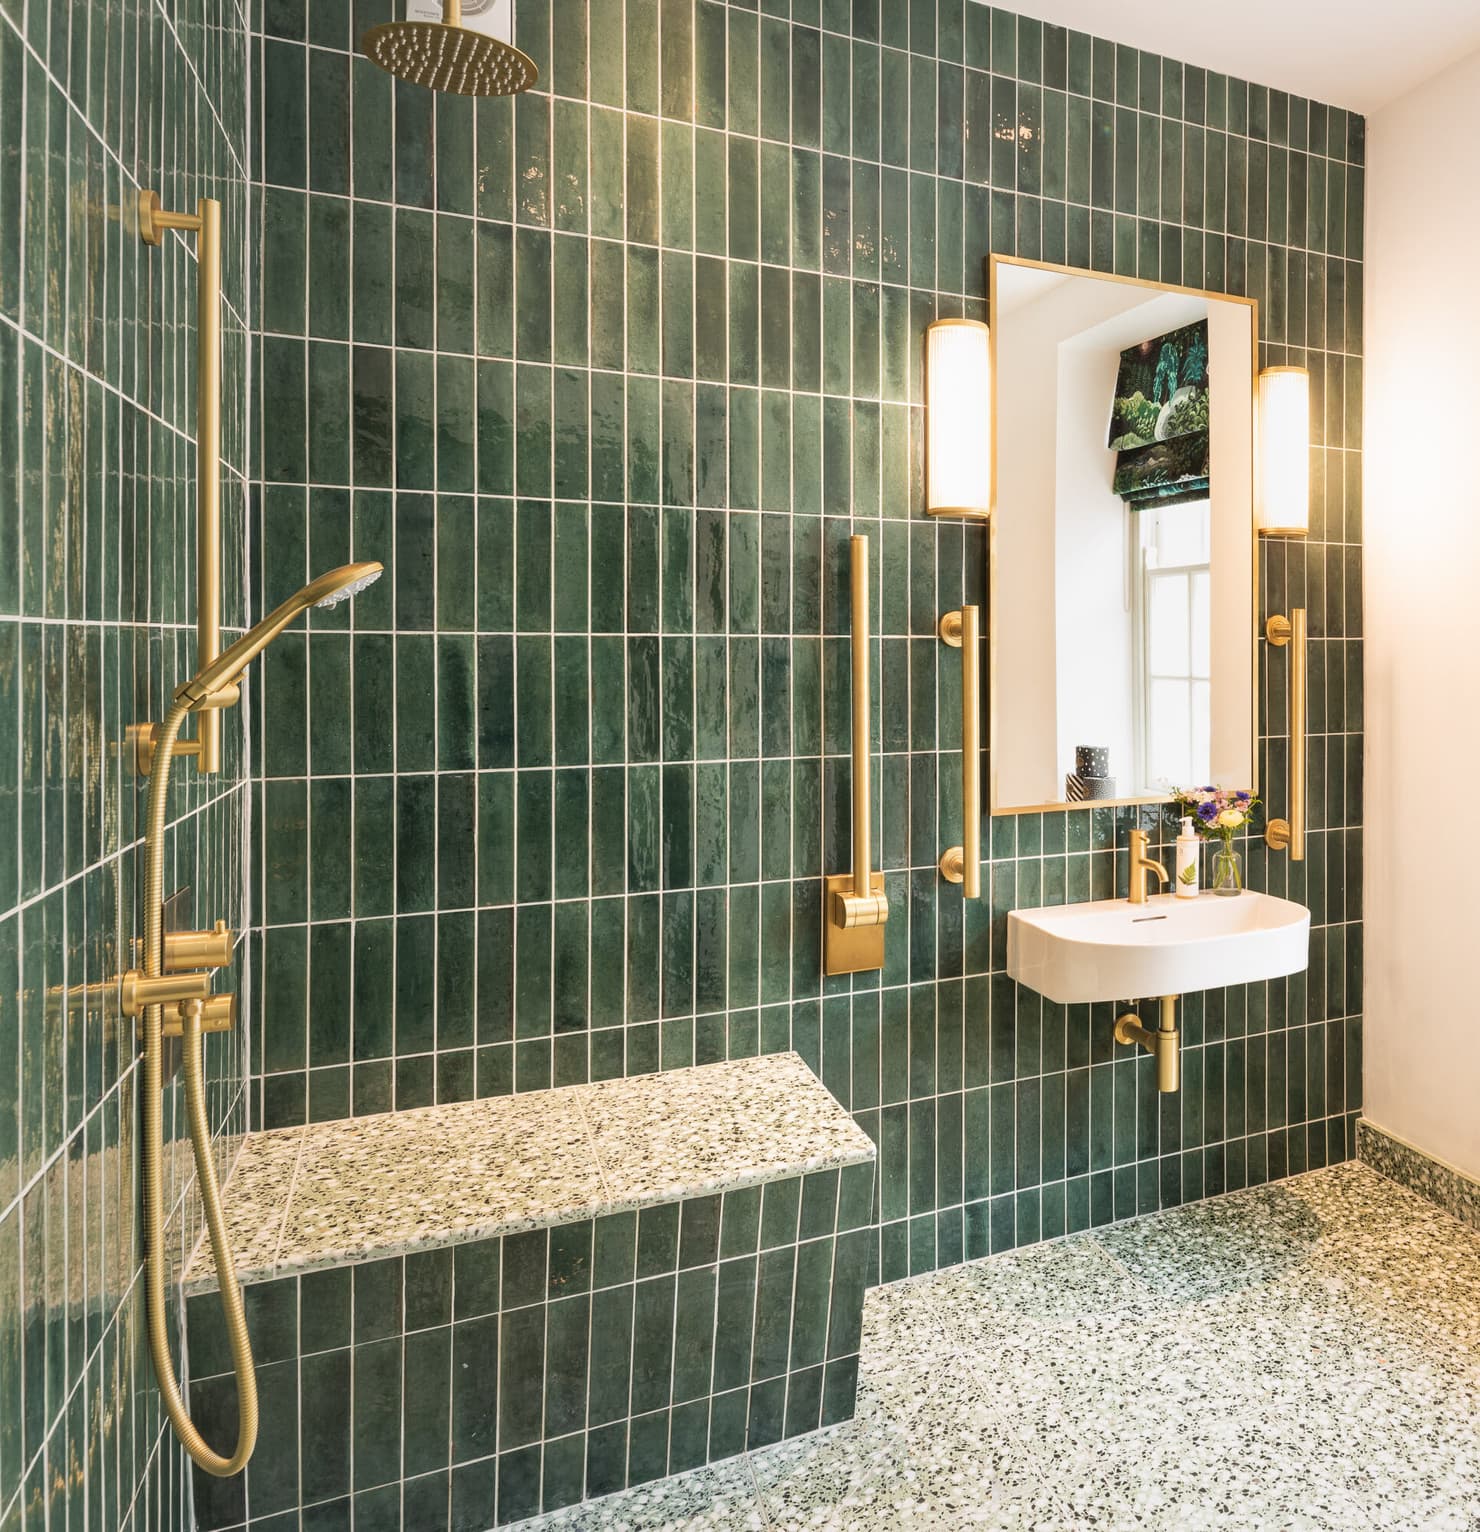 How to make a green statement in your bathroom